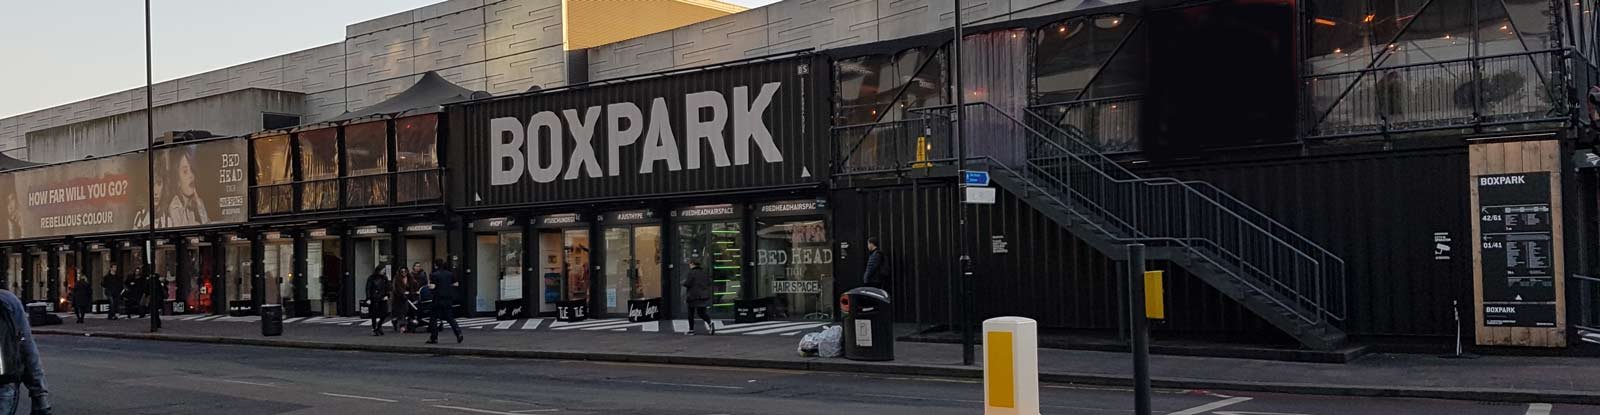 What to Eat at Boxpark in London